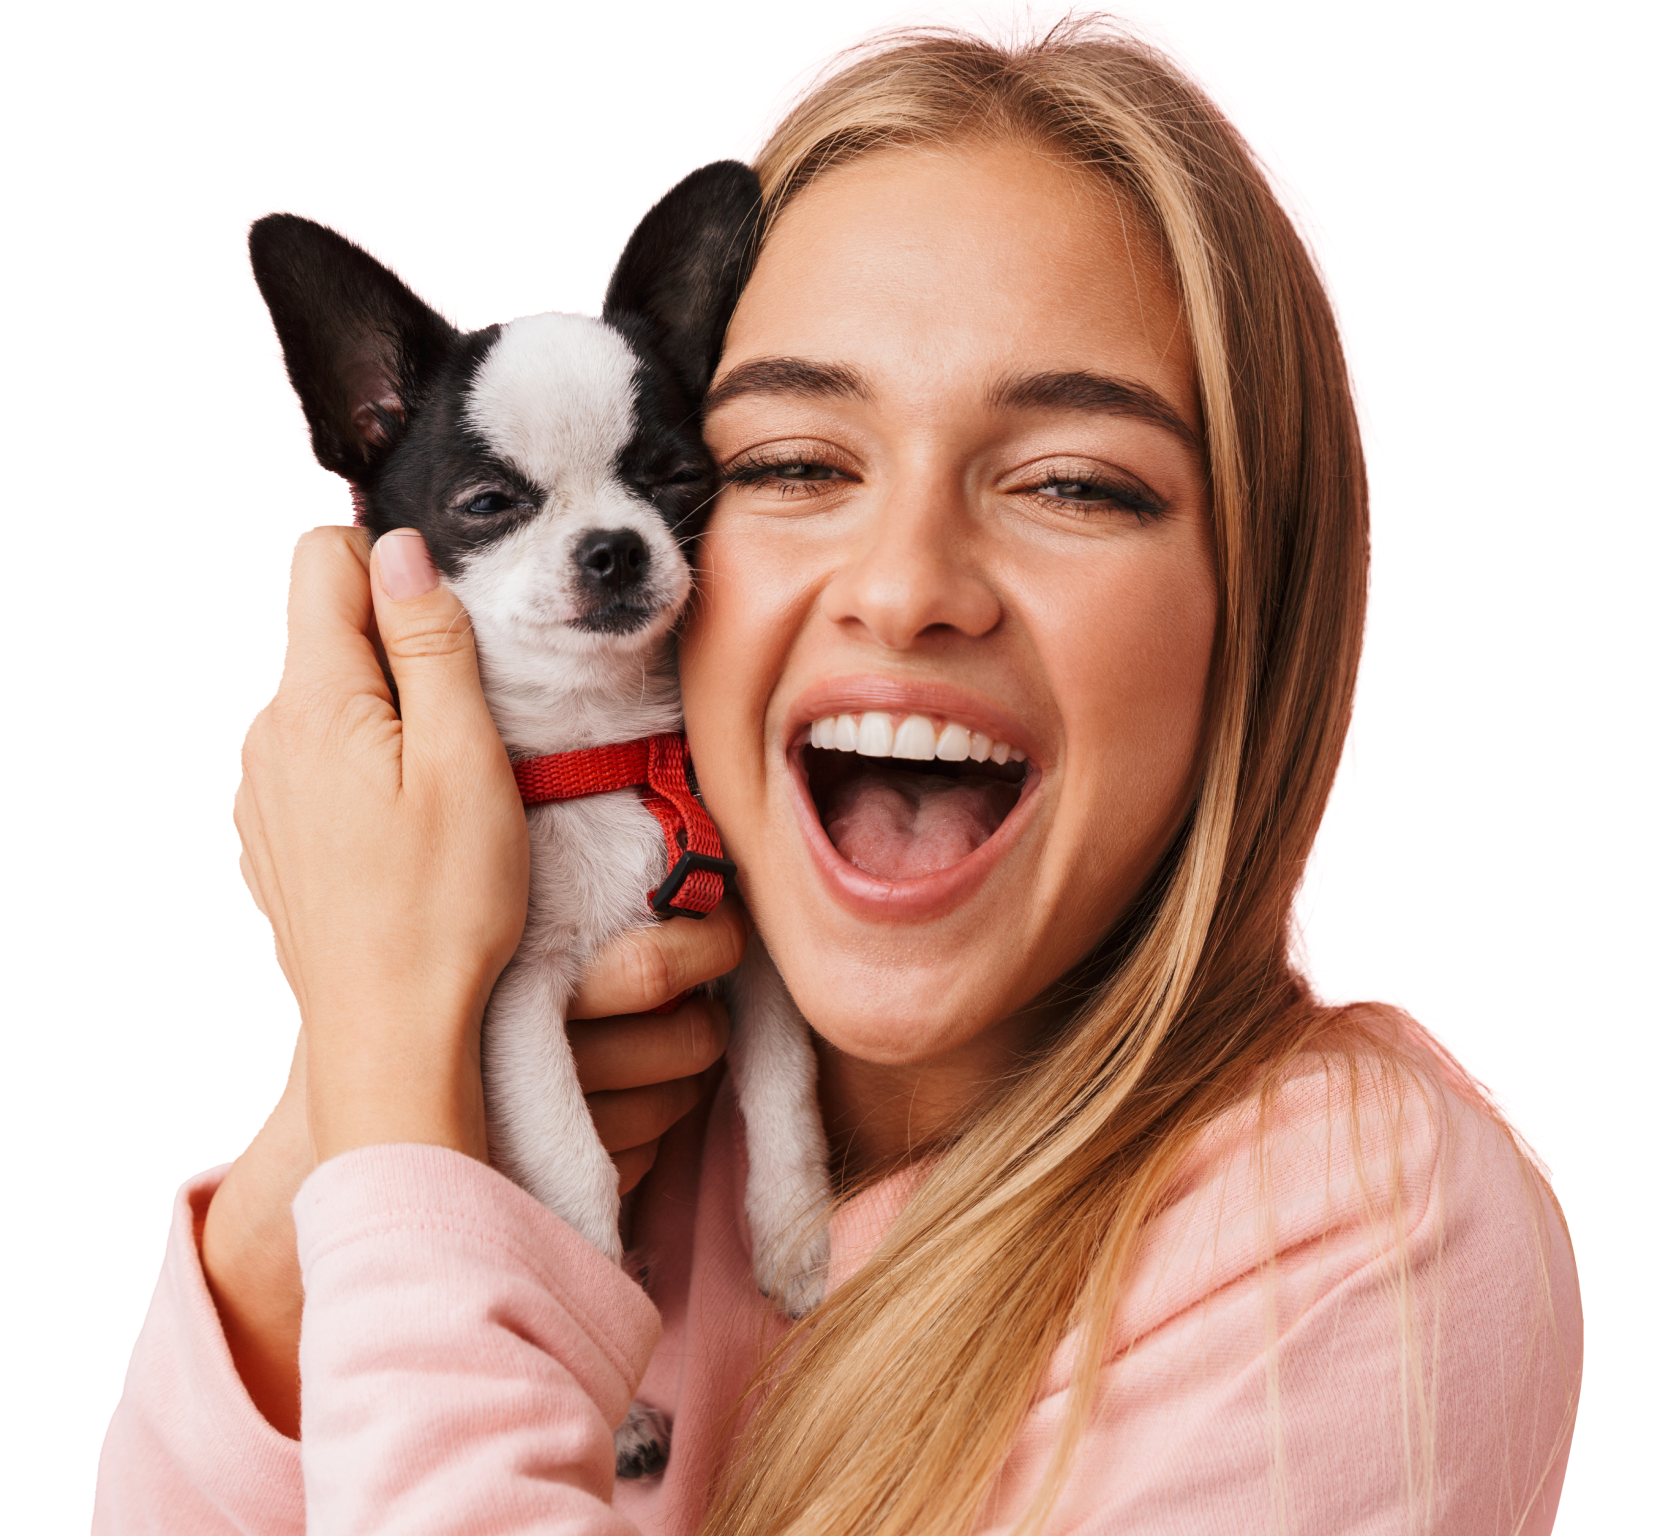 A woman smiling while hugging a dog